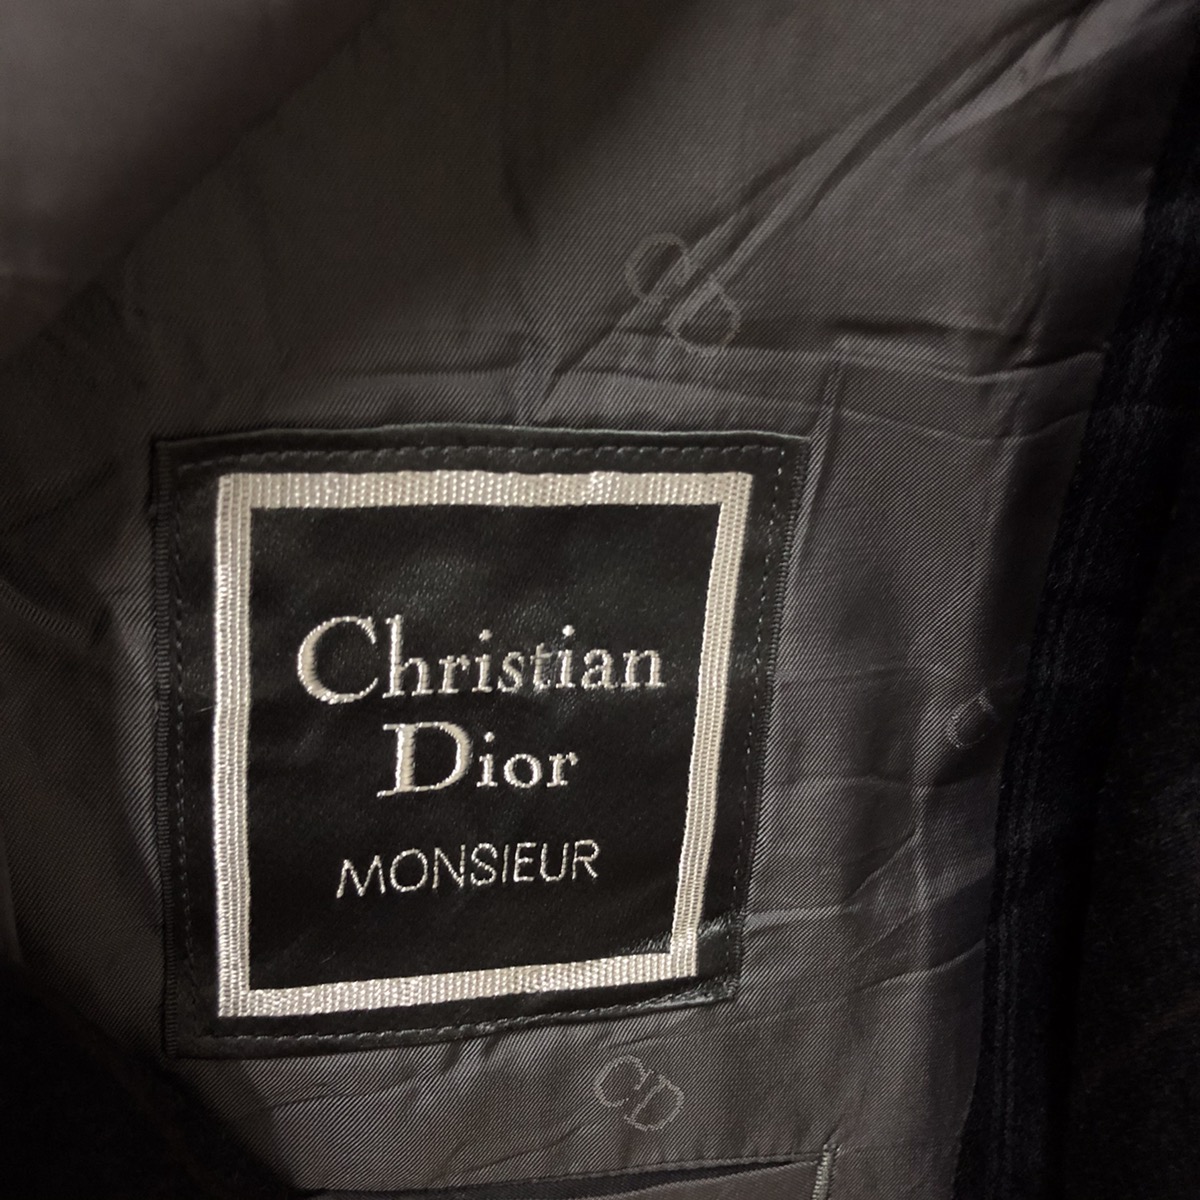 Christian Dior Monsieur - Christian dior monsieur wool classic suit black striped - 5